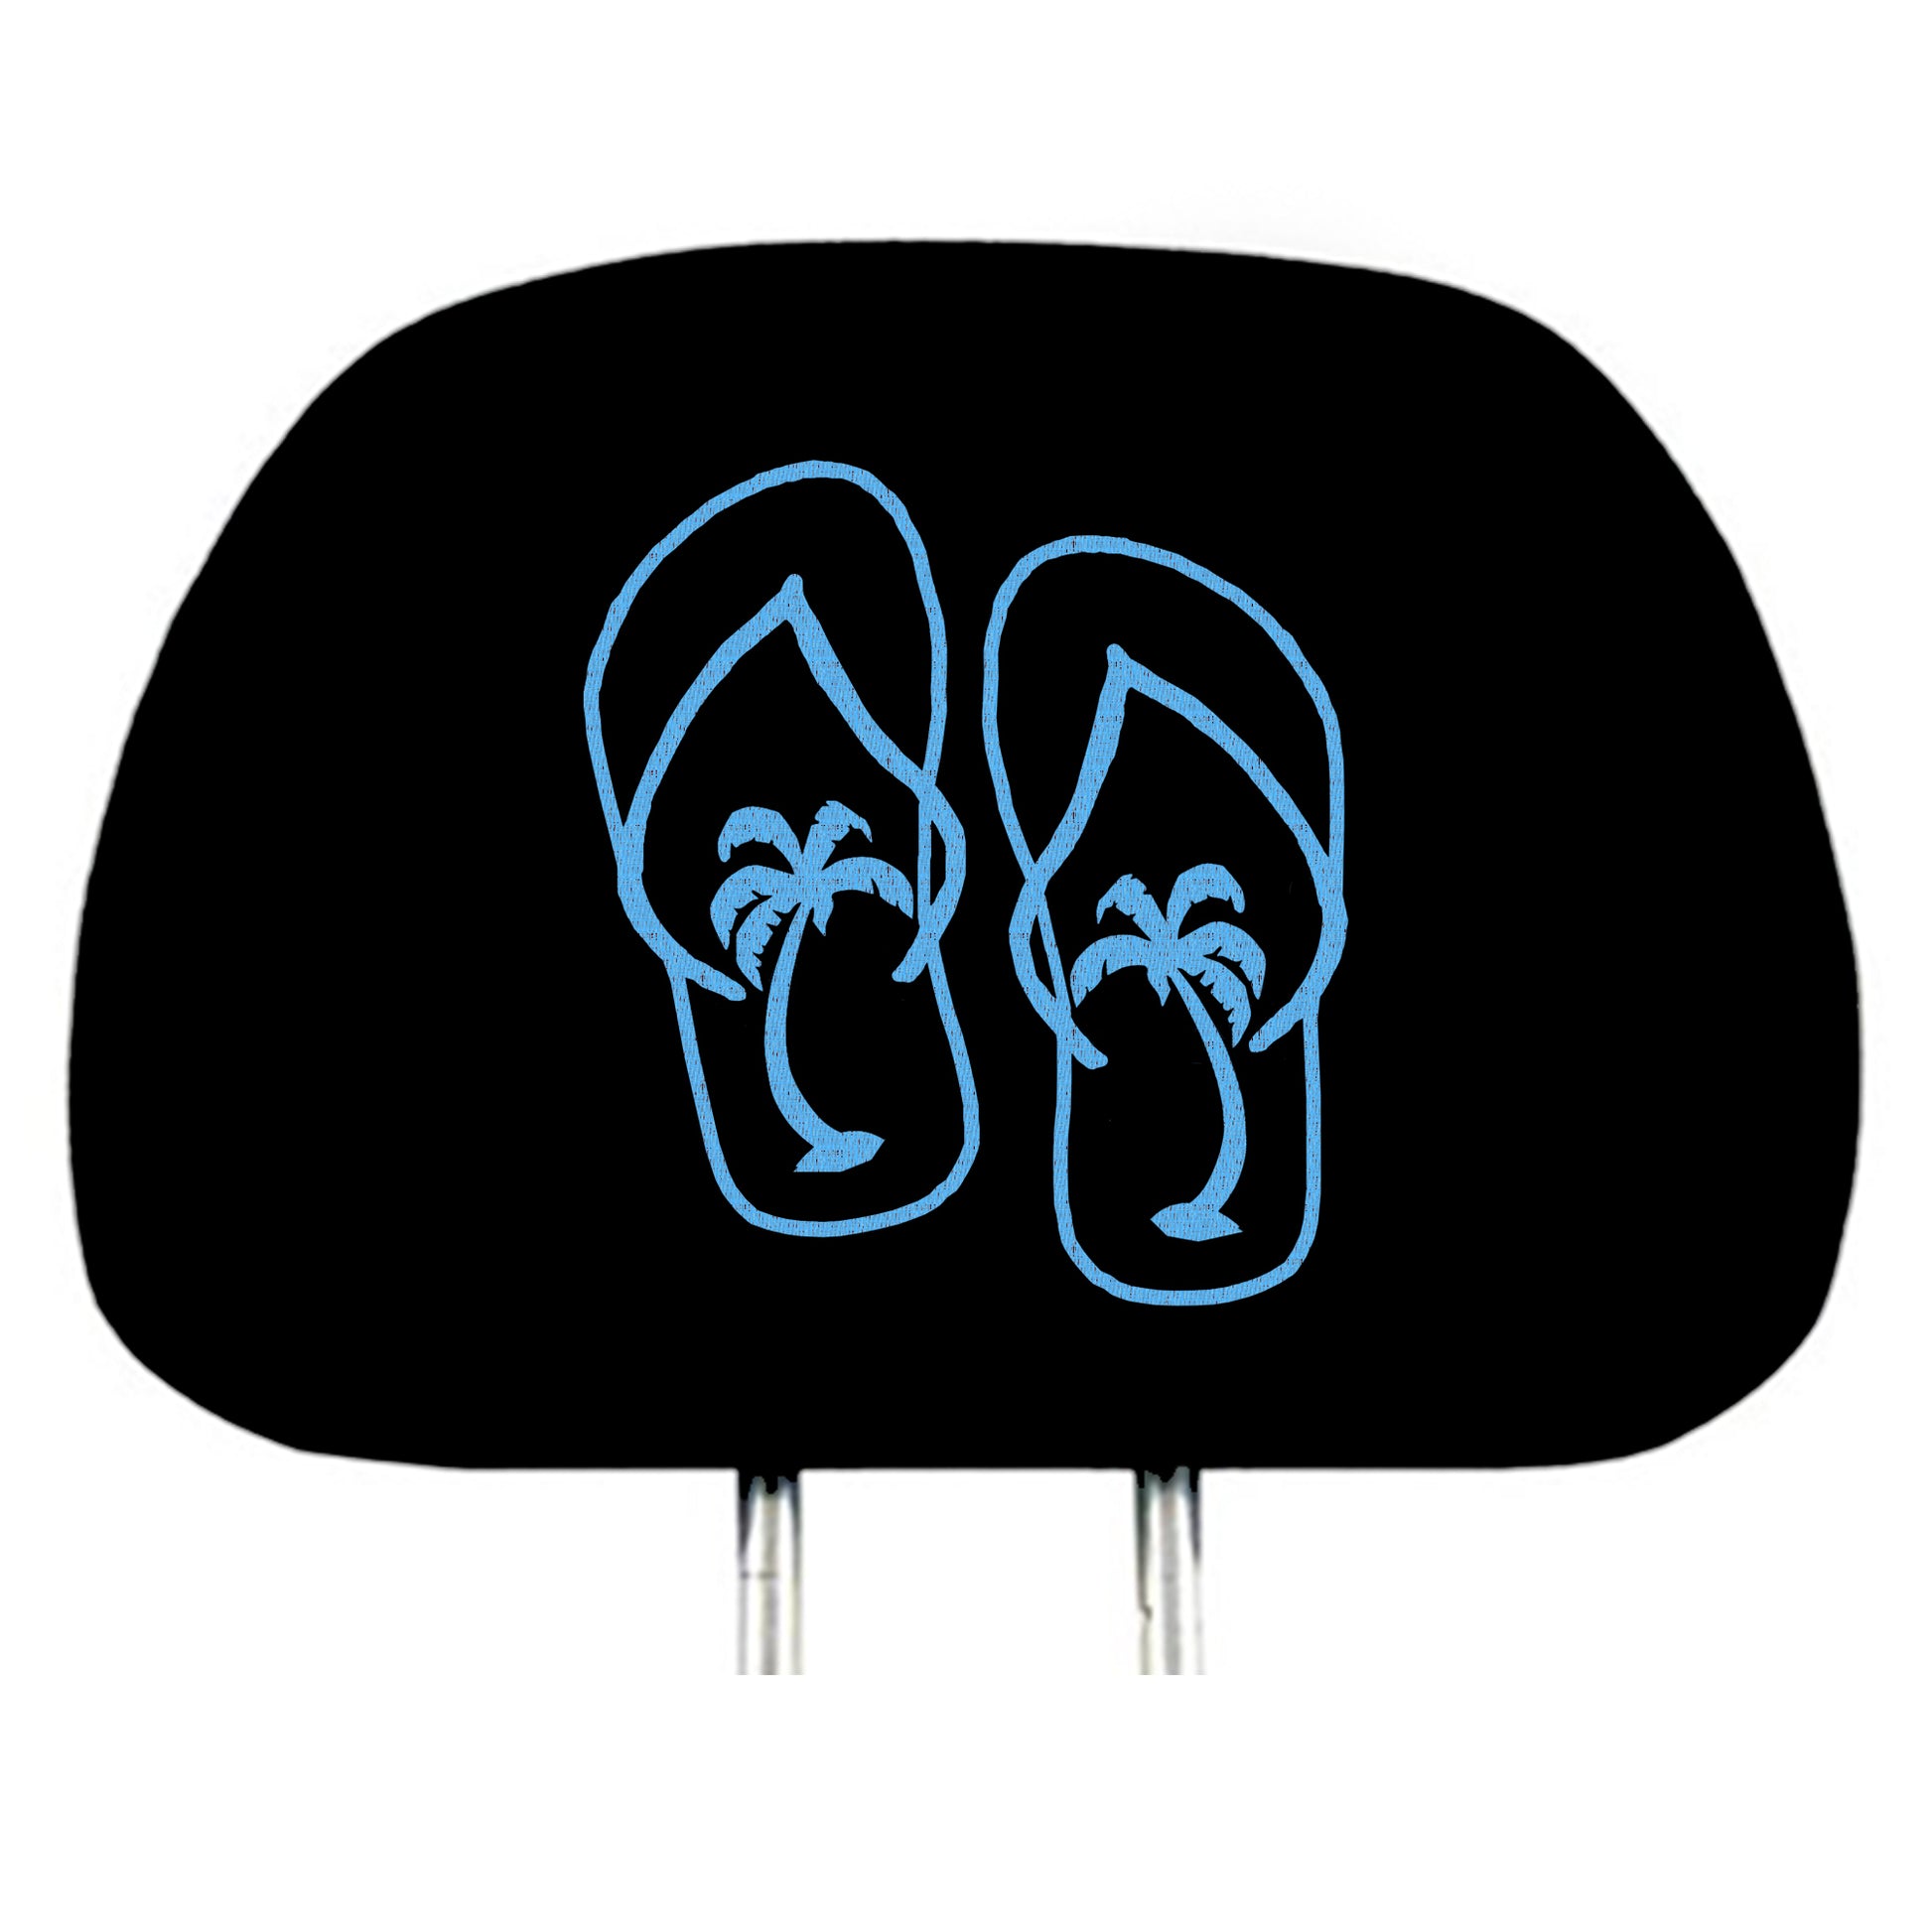 Pair of Embroidery Flip Flops Design Car Truck Seat Headrest Covers - Yupbizauto